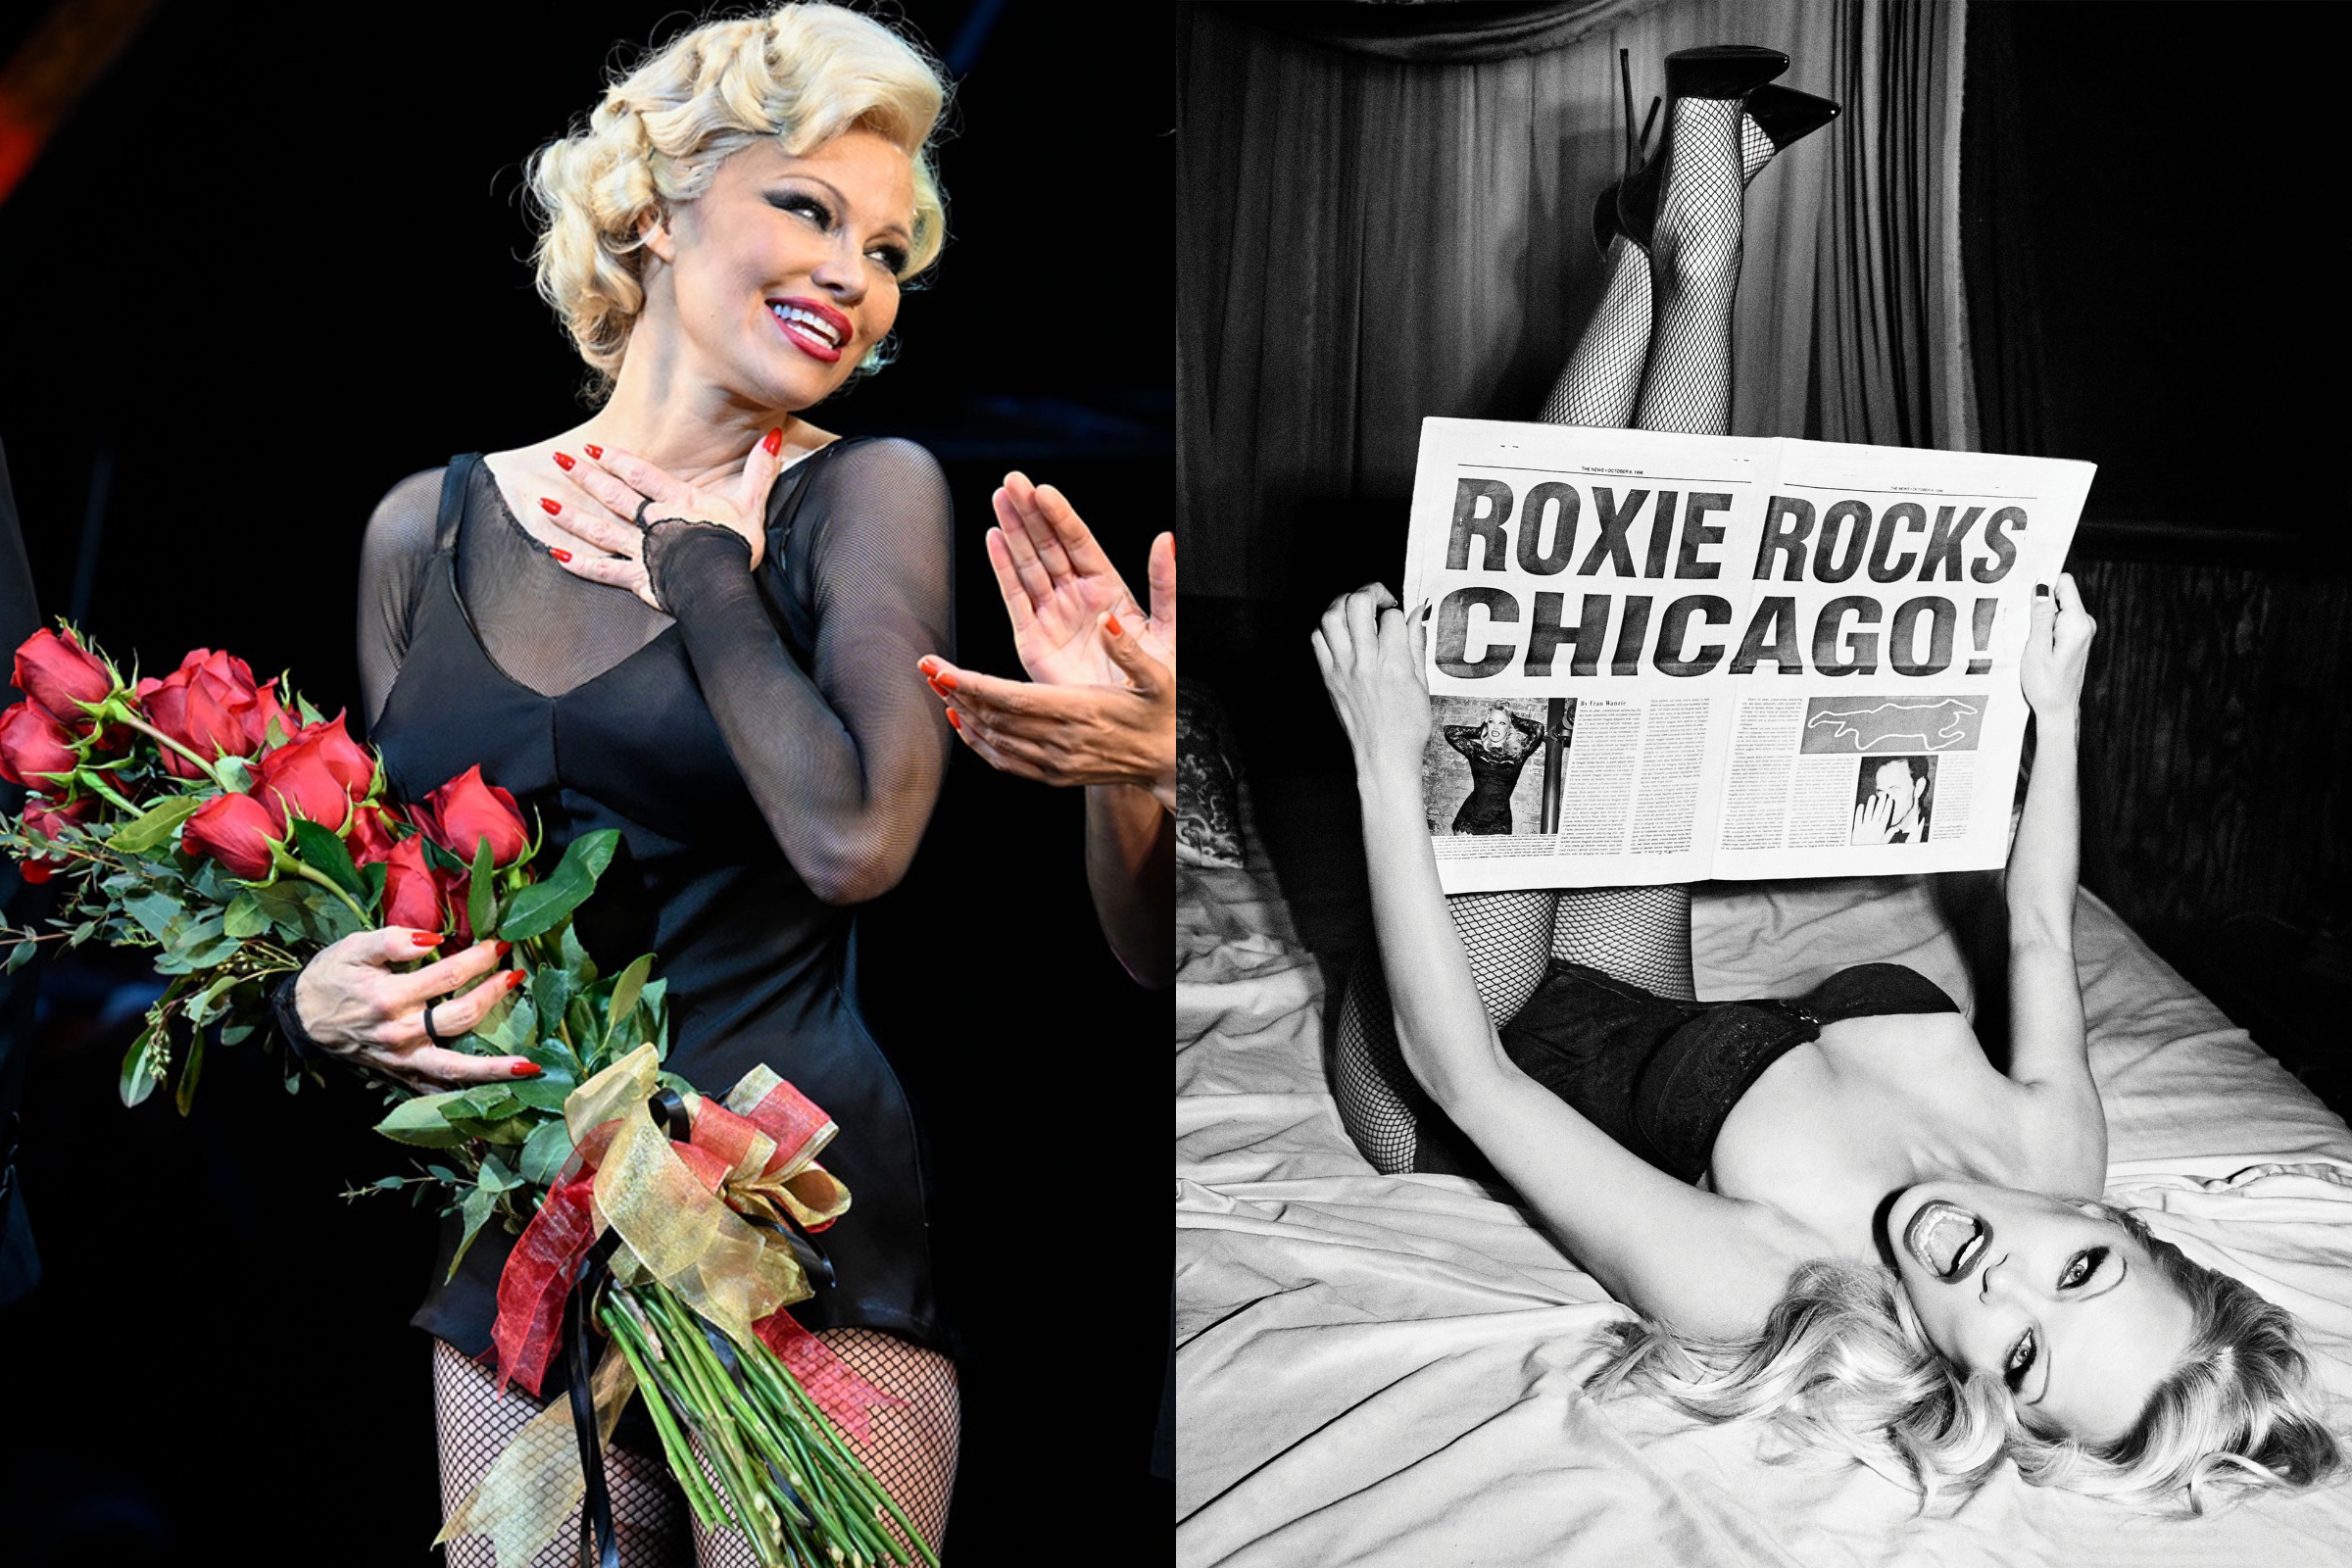 How the Audience Reacted to Pamela Anderson's Broadway Debut in 'Chicago'